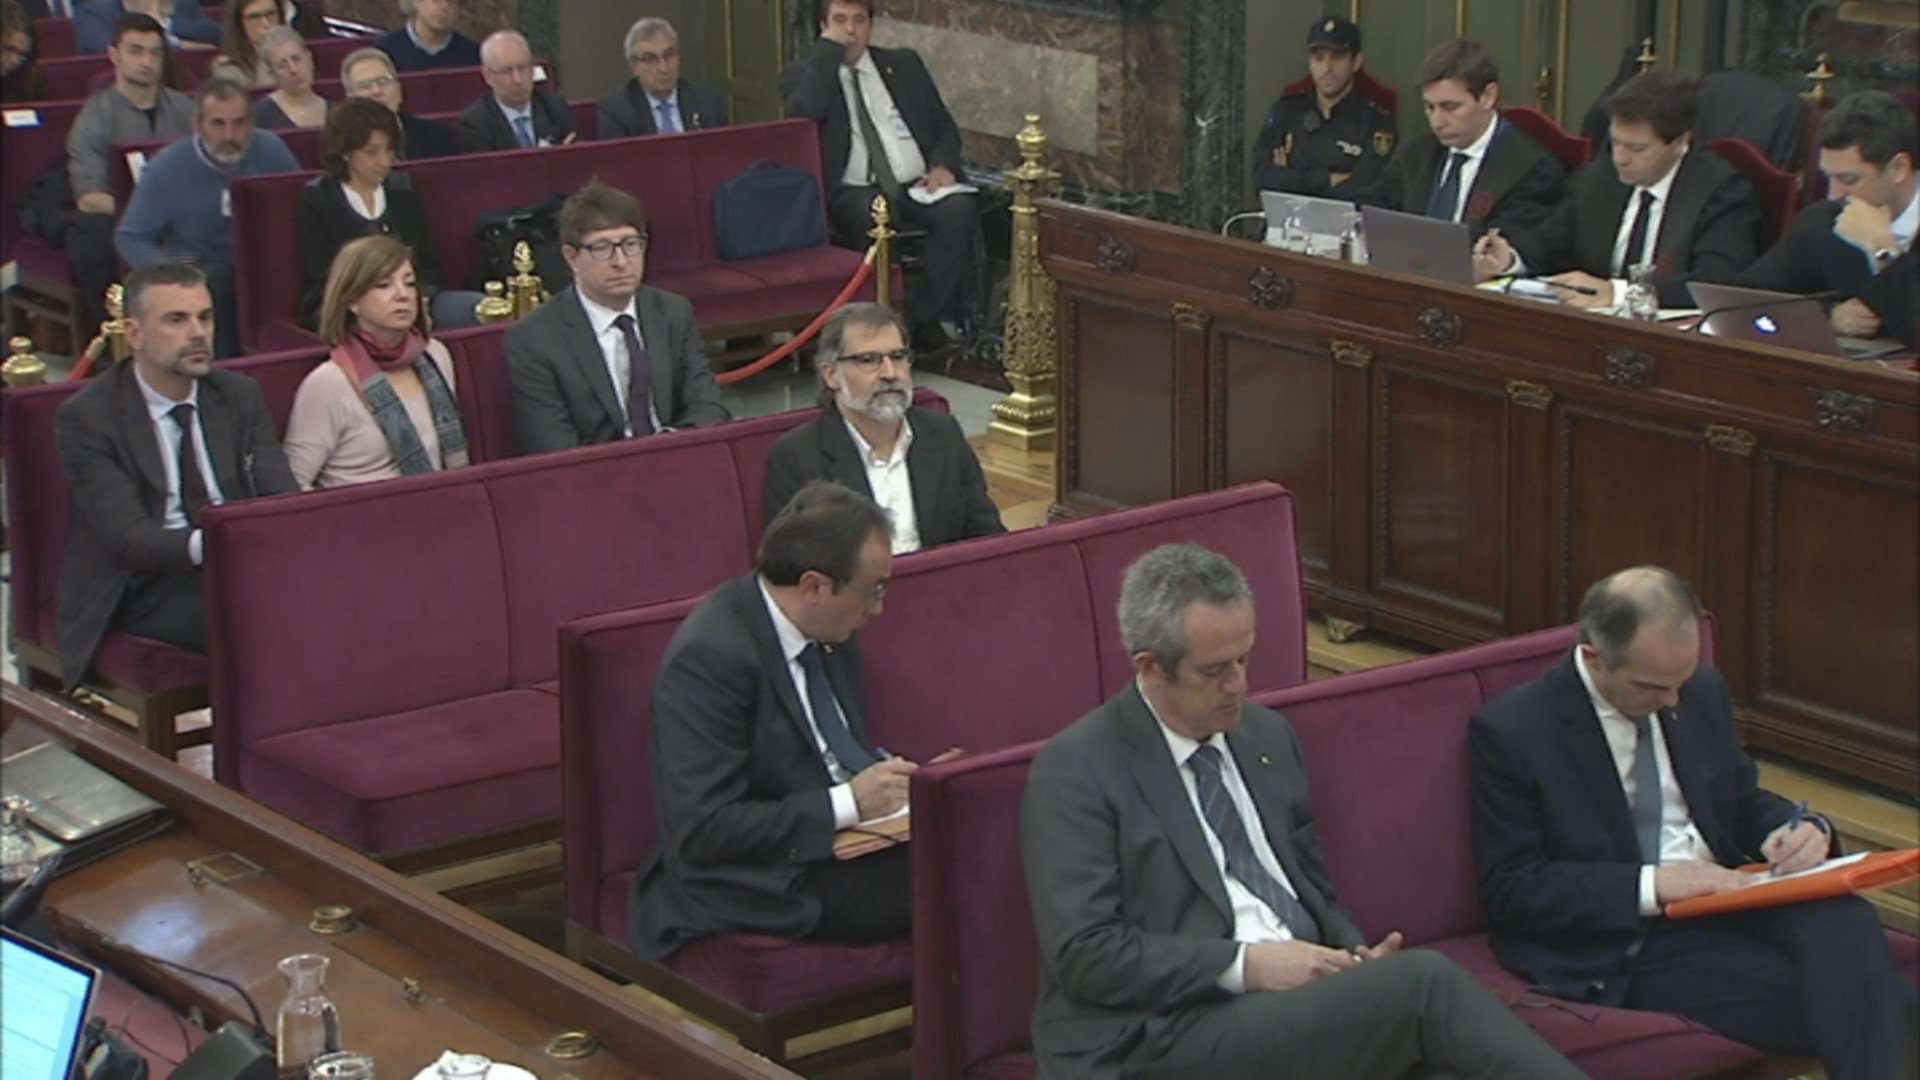 The defendants in the Catalan independence trial at the Spanish Supreme Court on April 10